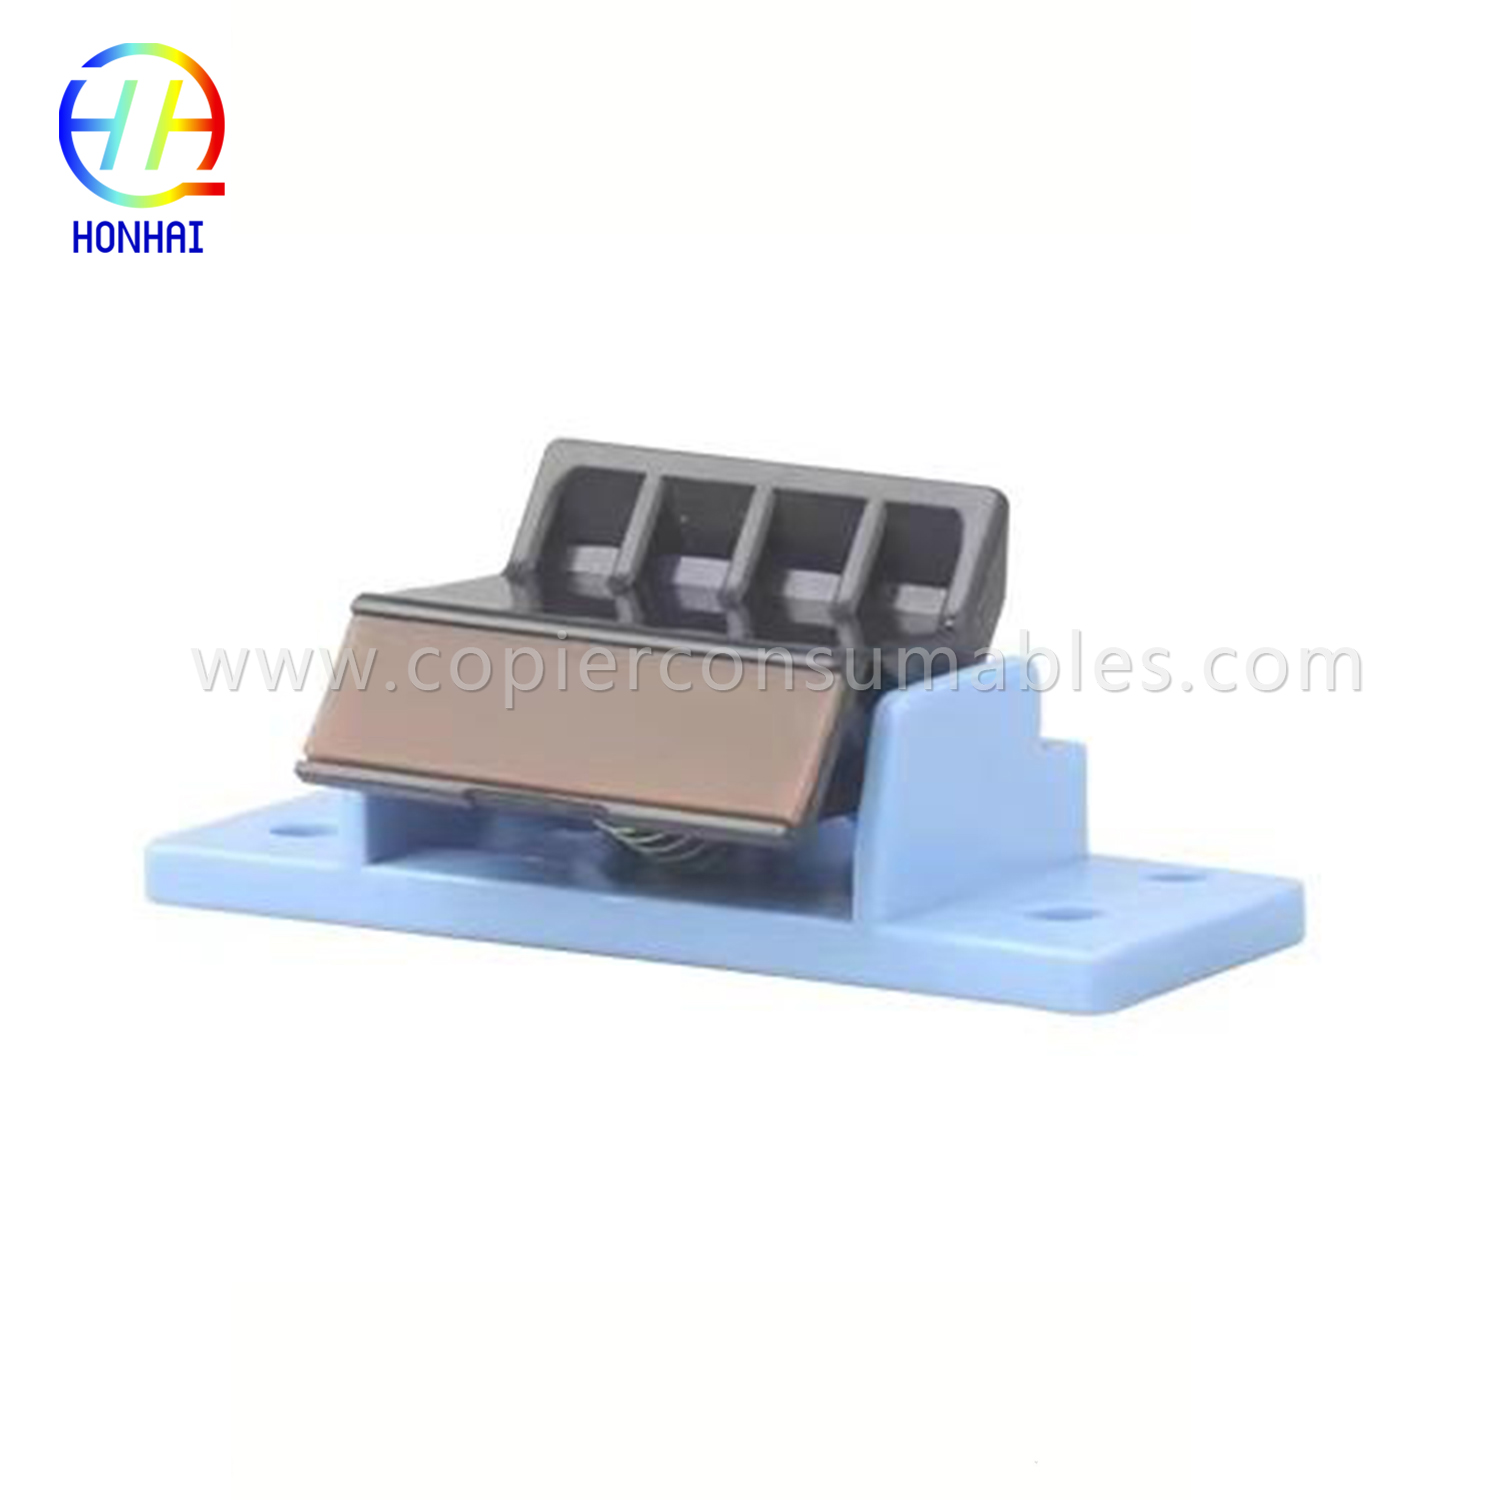 Separation Pad for HP Laserjet 1010 1012 1015 1018 1020 3015 3020 3030 3030xi M1005mfp RM1-0648-000